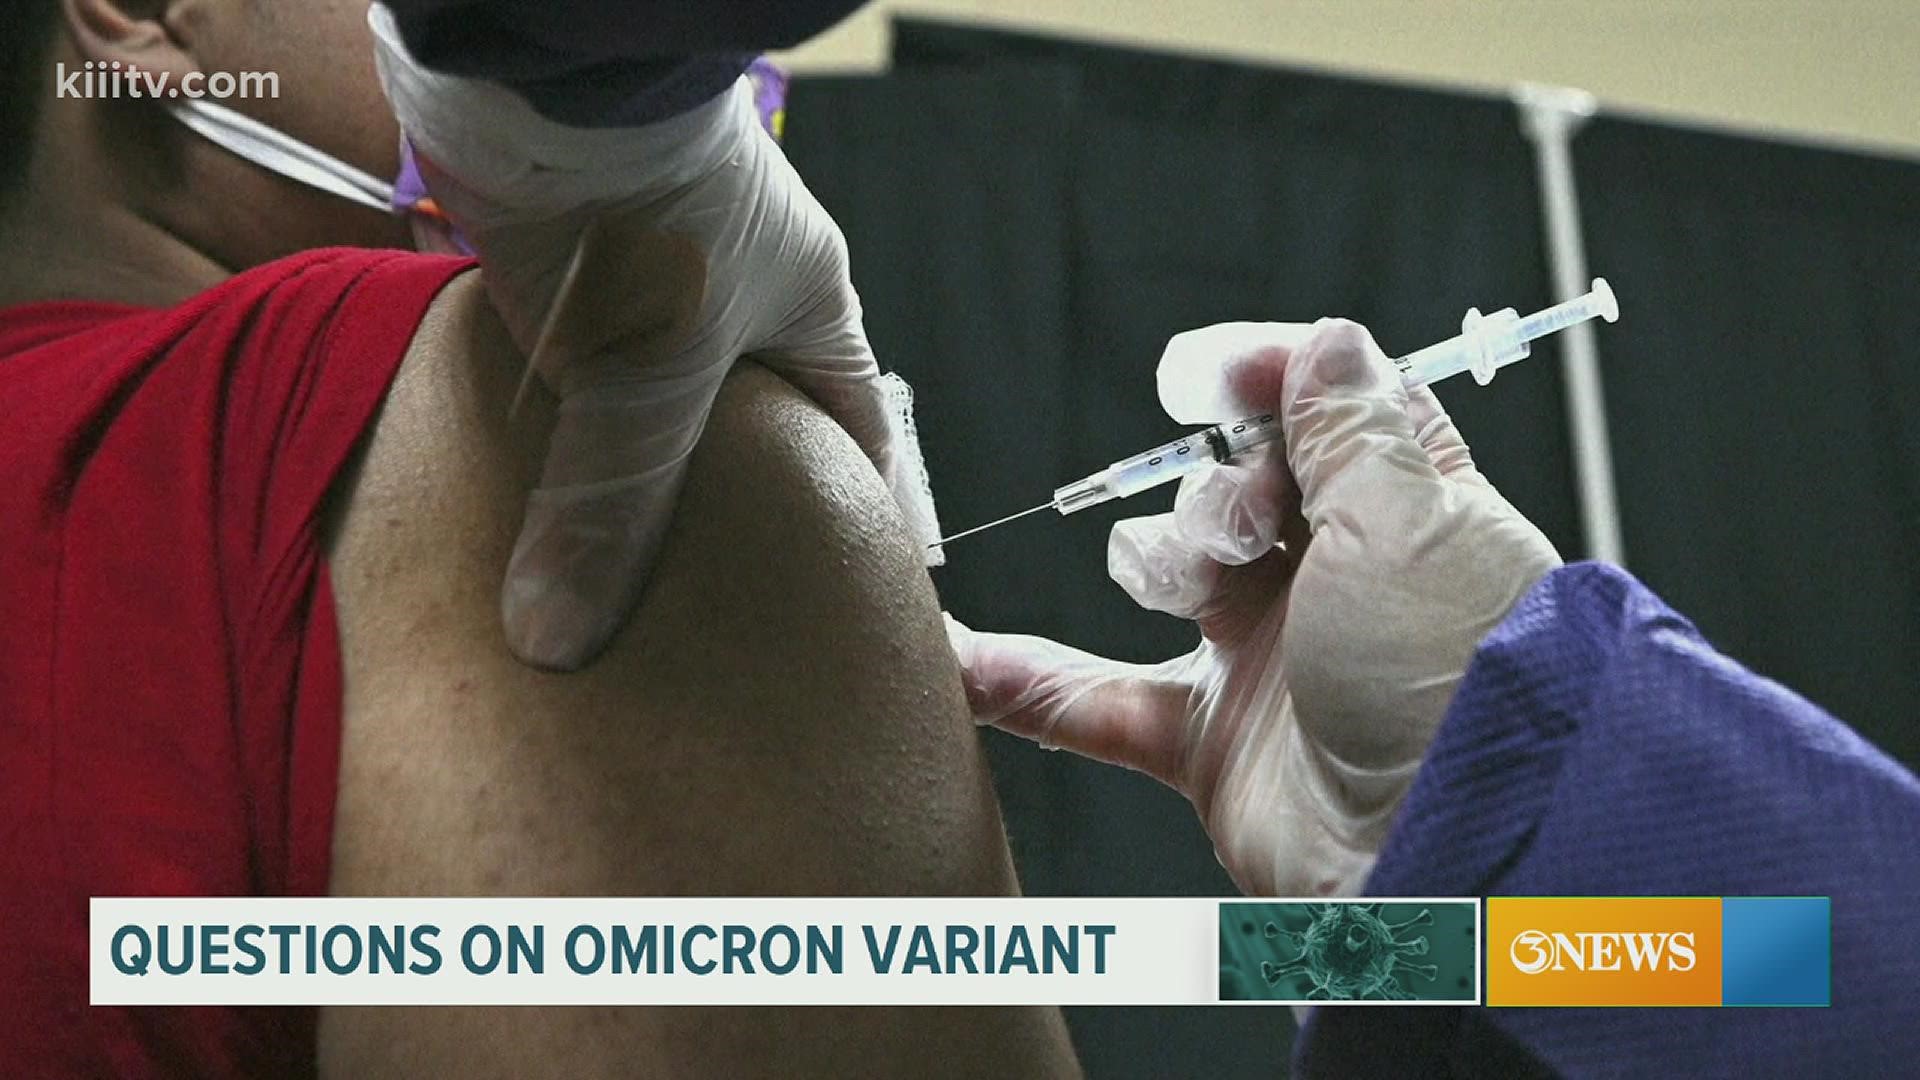 Dr. Surani joined First Edition to discuss the latest on the Omicron variant.